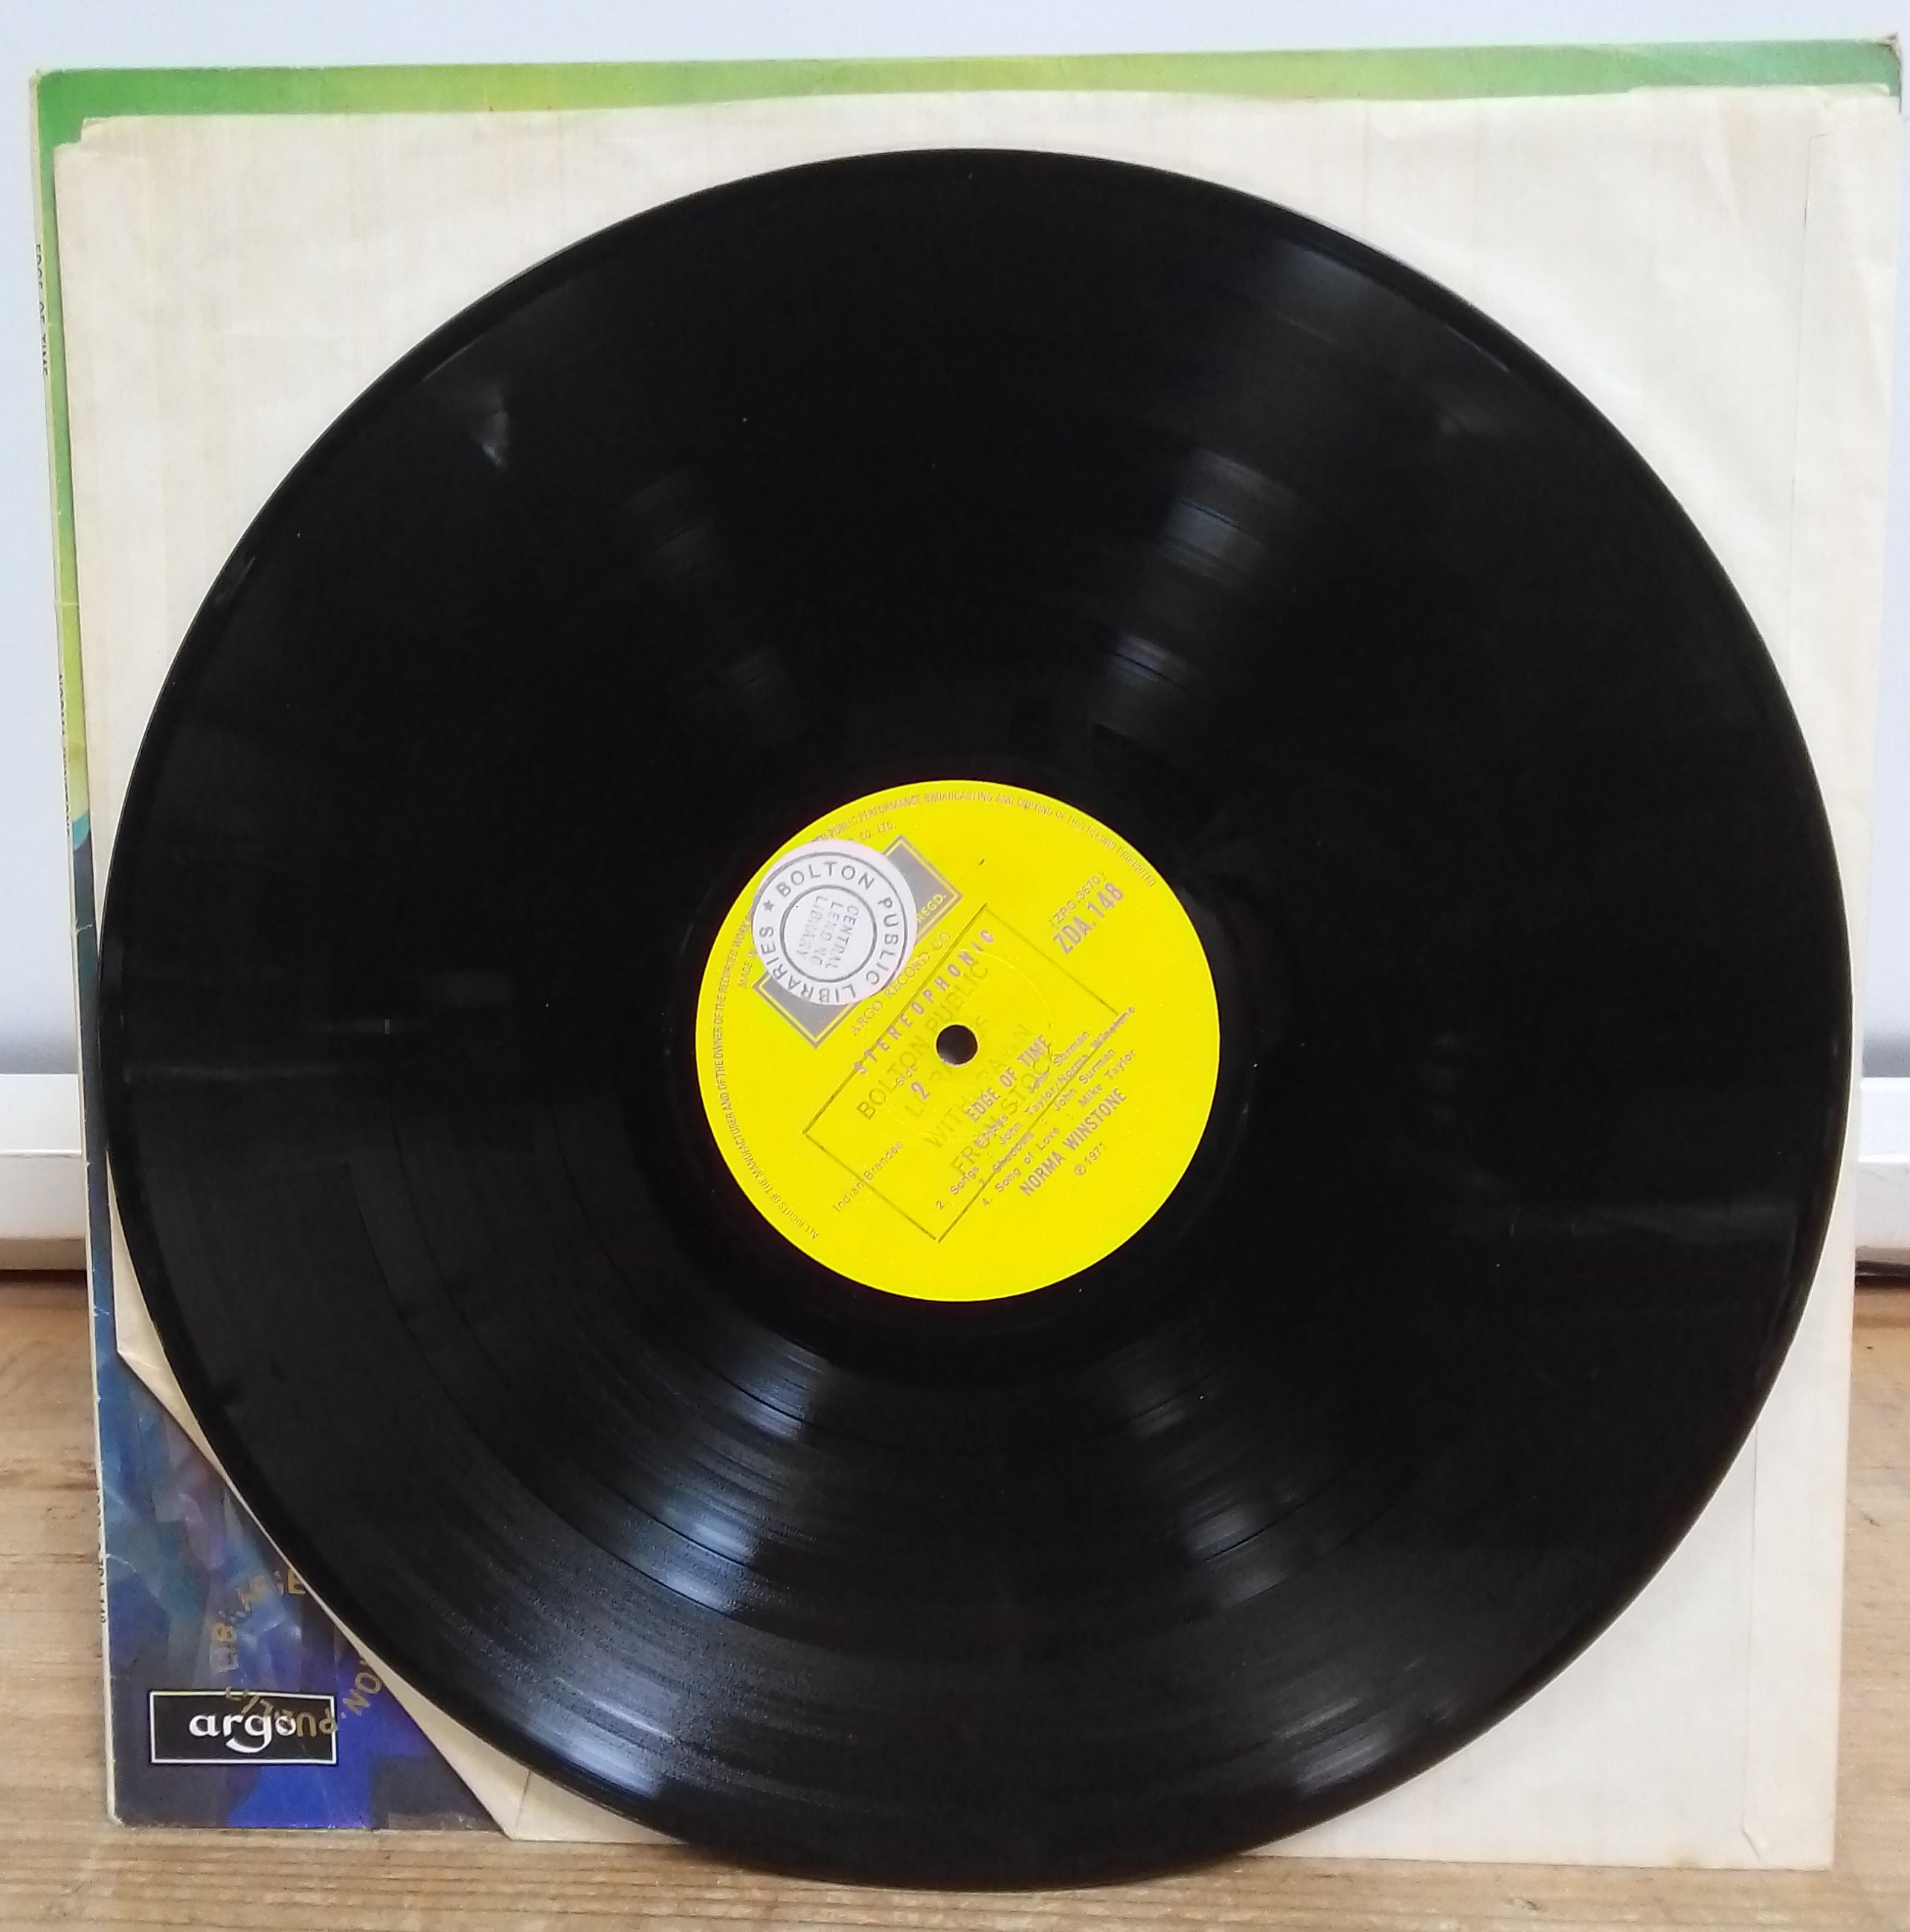 Norma Winstone - Edge of Time, stereo LP, 1st pressing, UK 1972, ZDA 148, ex library copy. - Image 3 of 4